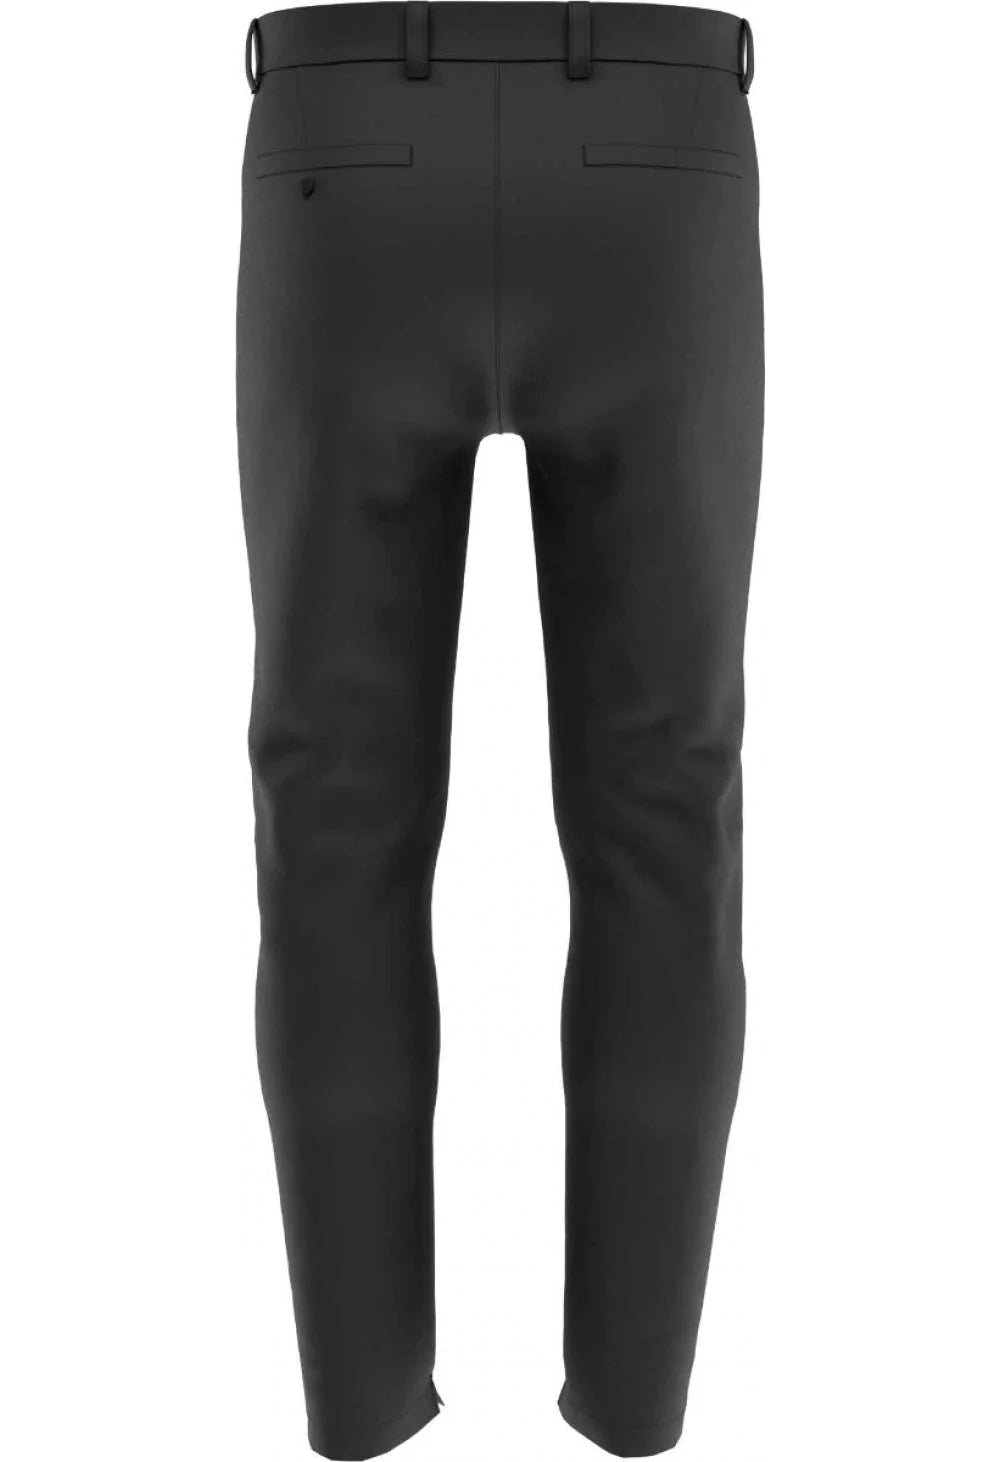 Callaway Water Resistant Thermal Trousers - Asphalt – Golf Clearance Online